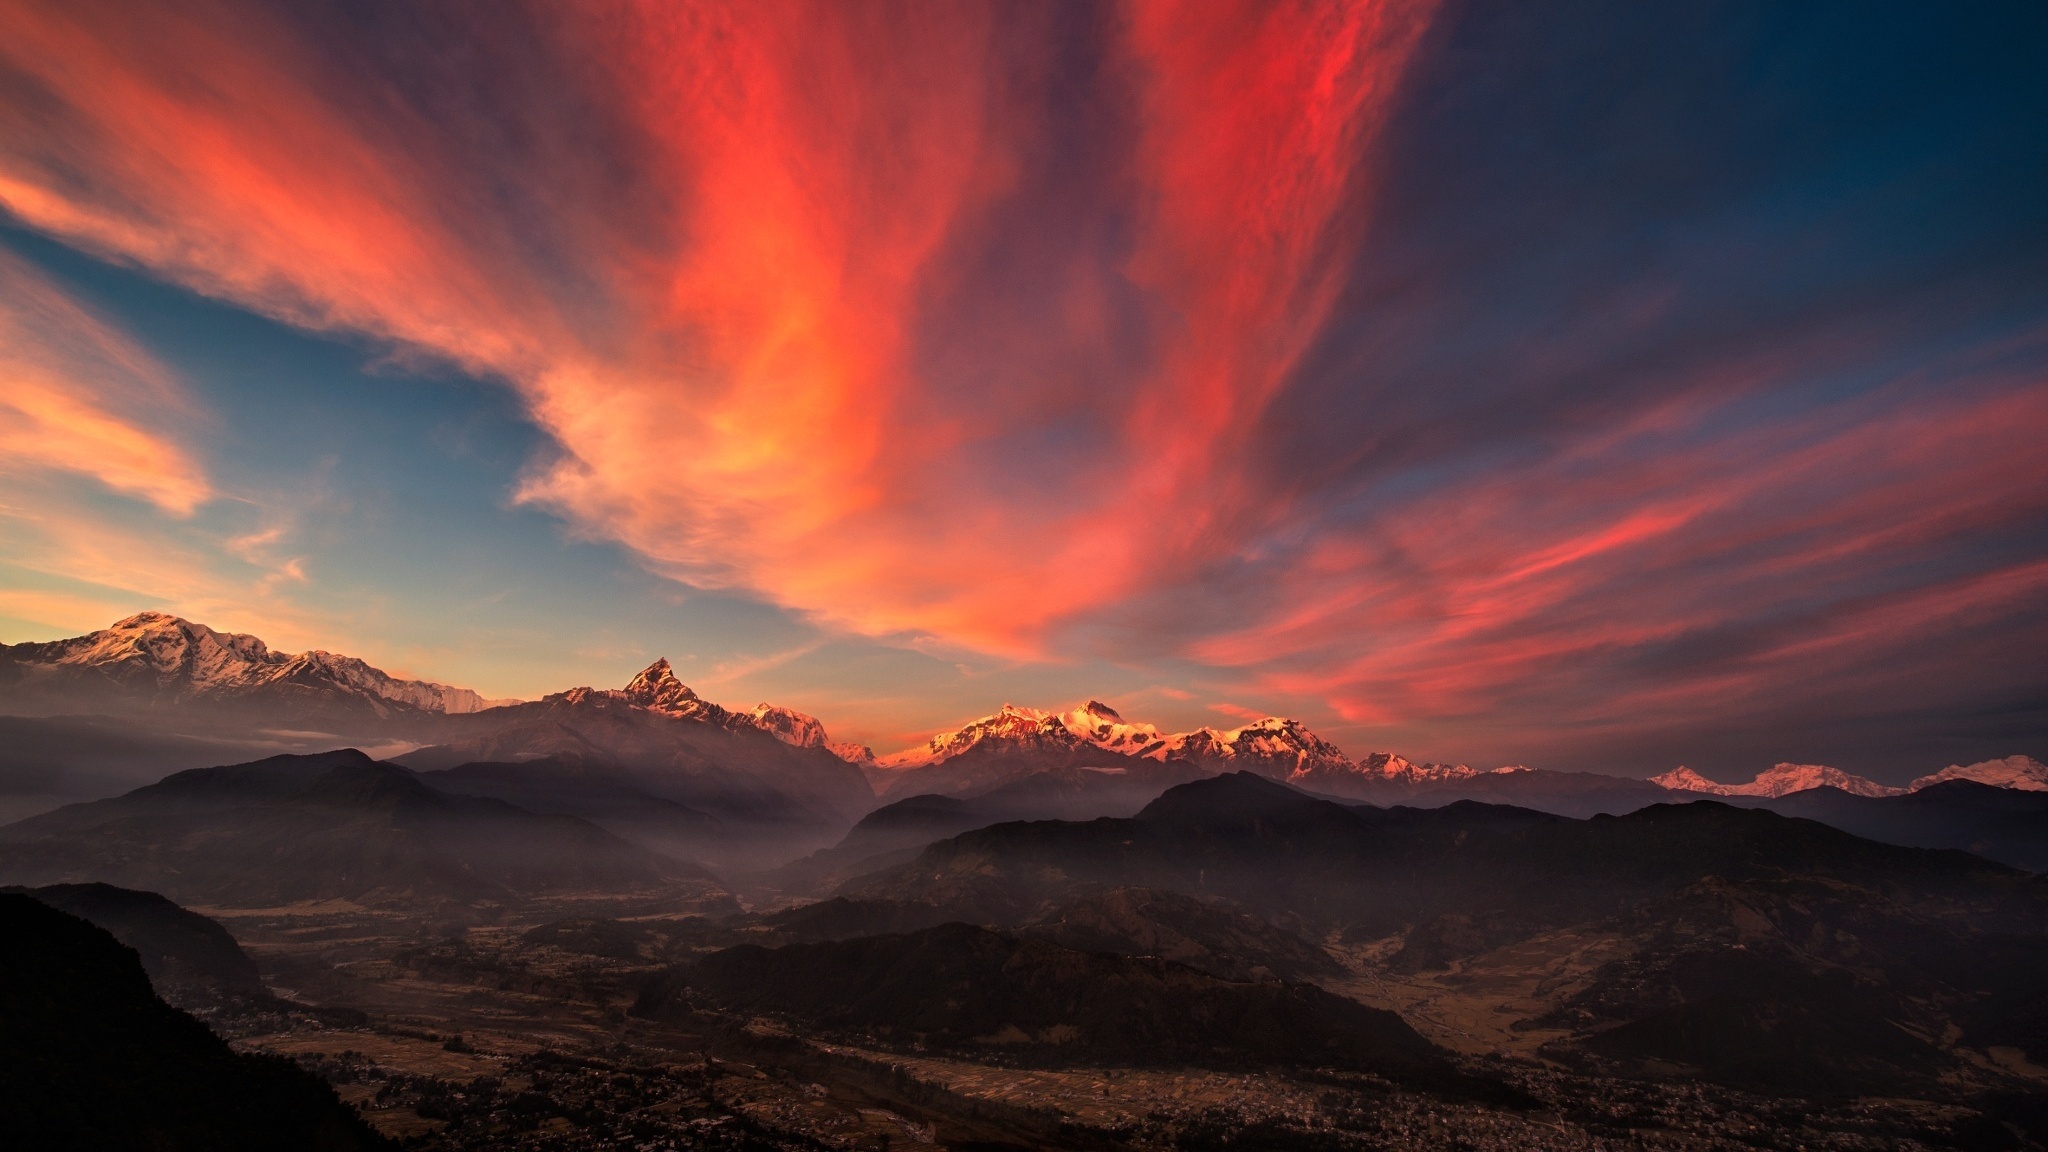 Sunrise Valley Tibet Mountains 2048 x 1152 Download Close